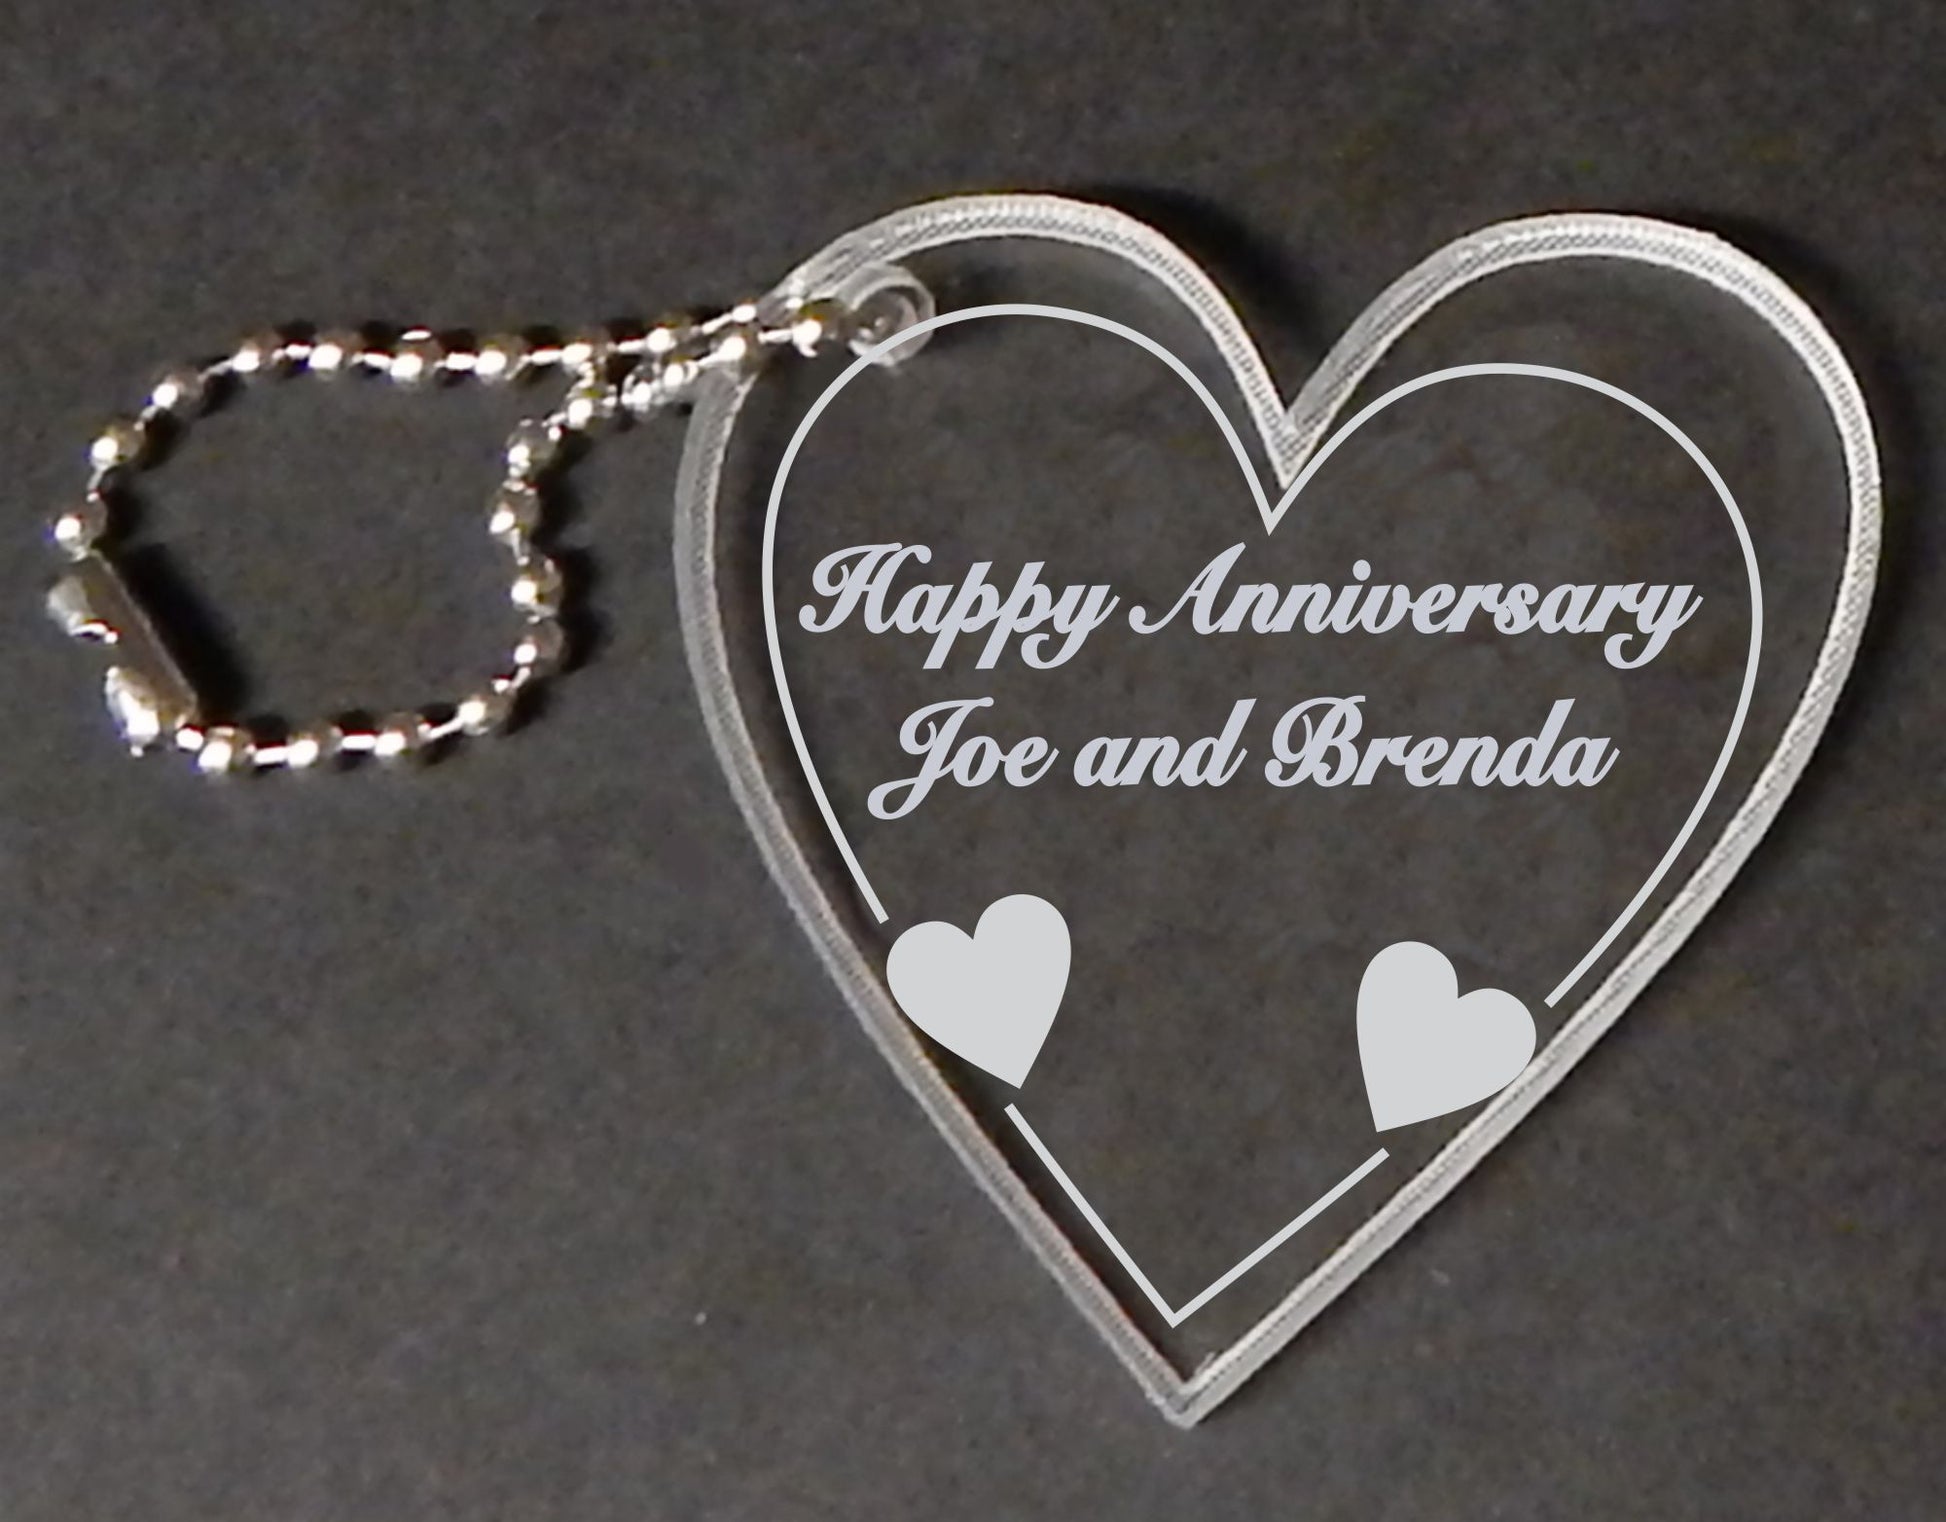 heart shaped acrylic keychain with small attached chain, engraved with Happy Anniversary and names